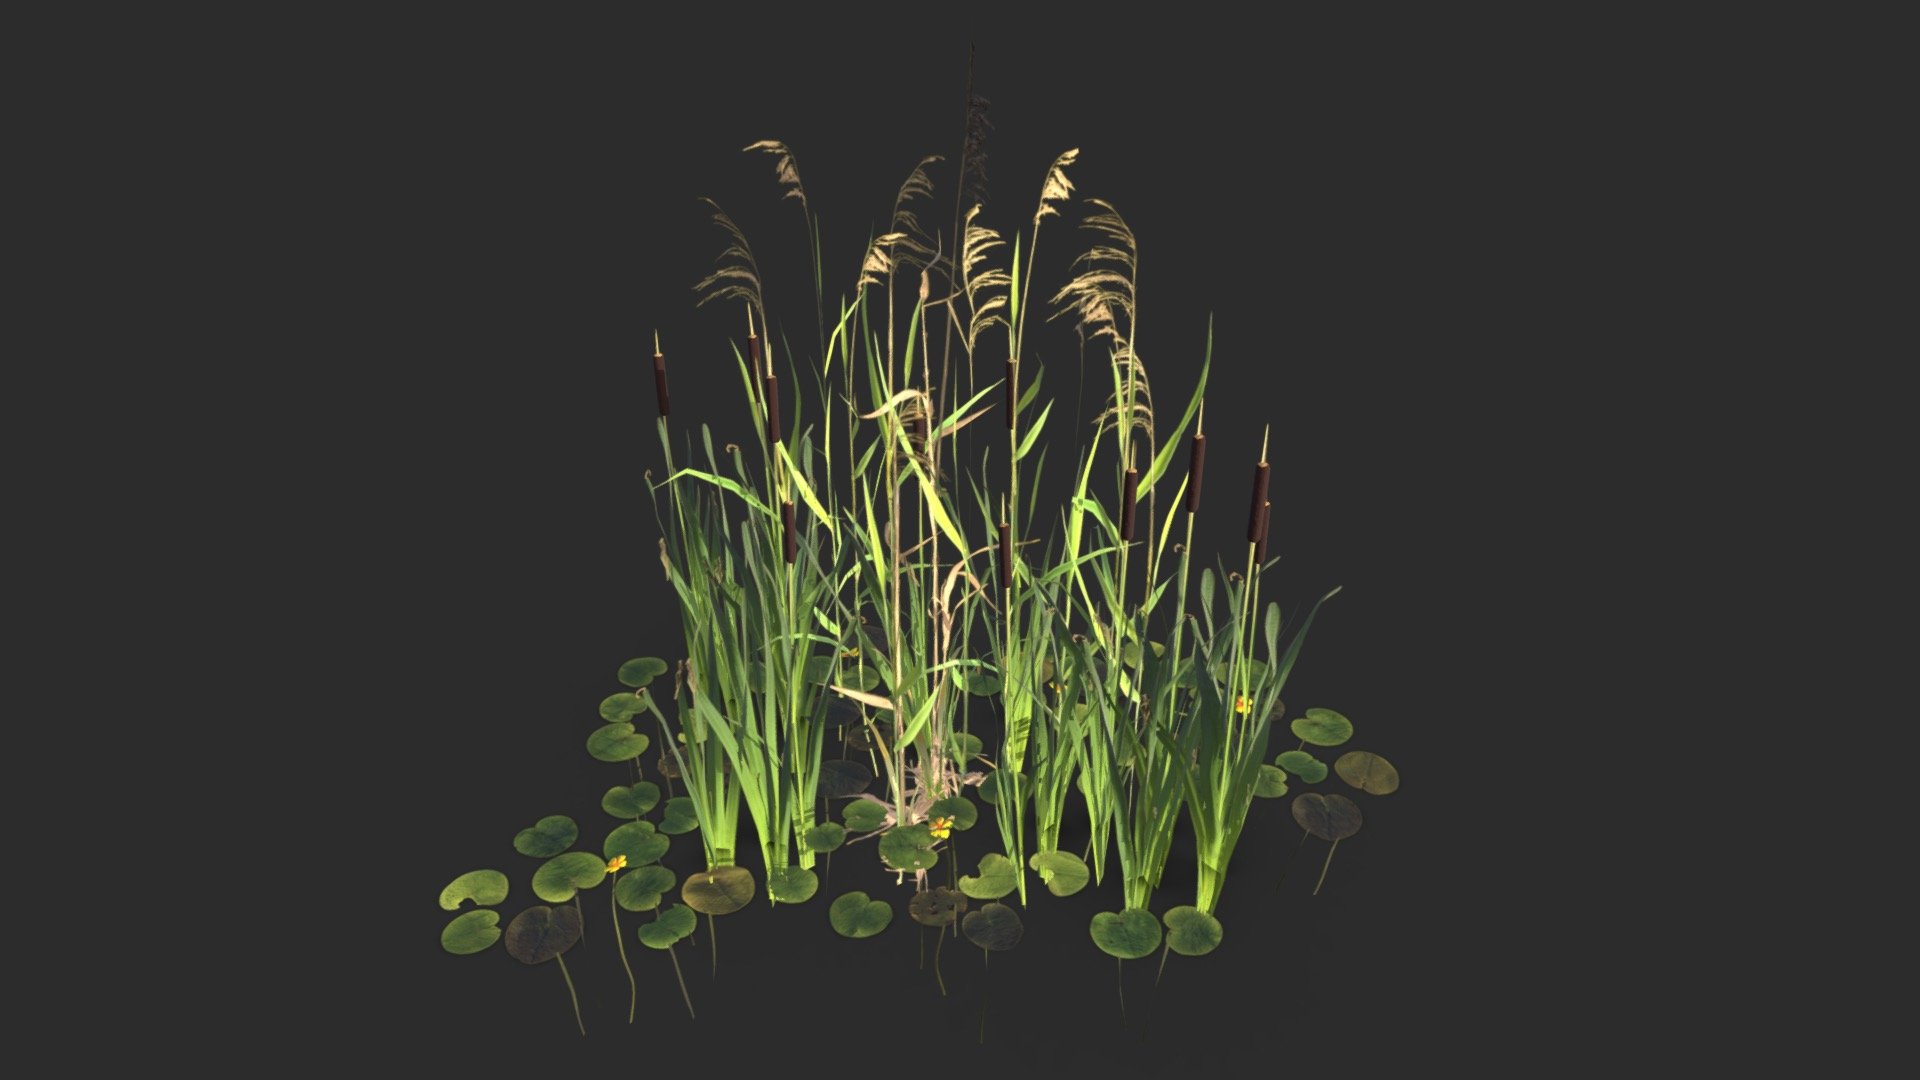 This freshwater plants set includes 3 species :
* Common Cattail
* Yellow Water-Lily
* Sugarcane Plume Grass

The set includes 42 unique modular objects and 18 prefabs ready to be added in your own scene. Also including vertex color attributes for wind animations in Unreal Engine with the &ldquo;Simple Grass Wind